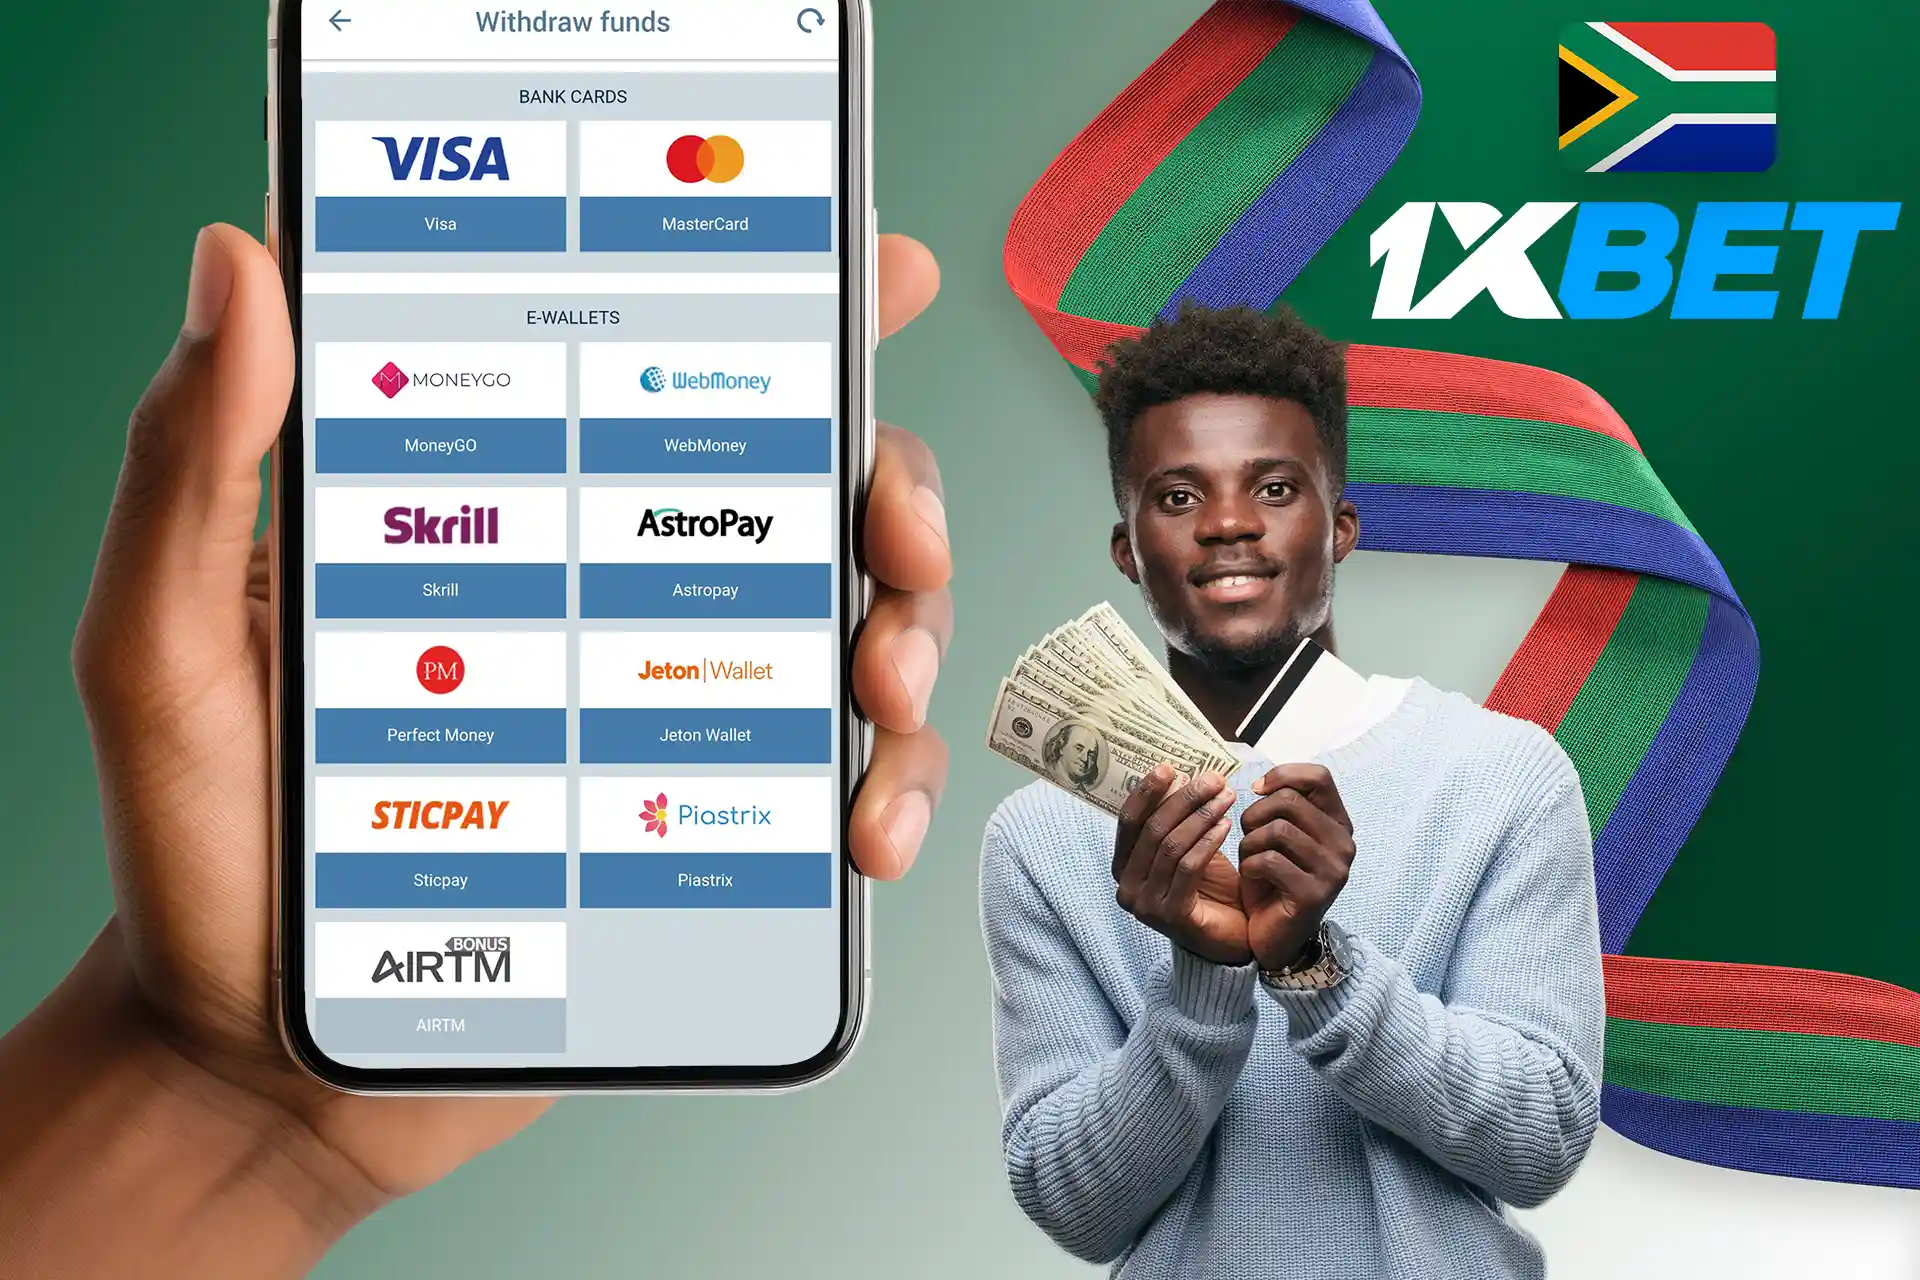 Withdraw your winnings at 1xBet